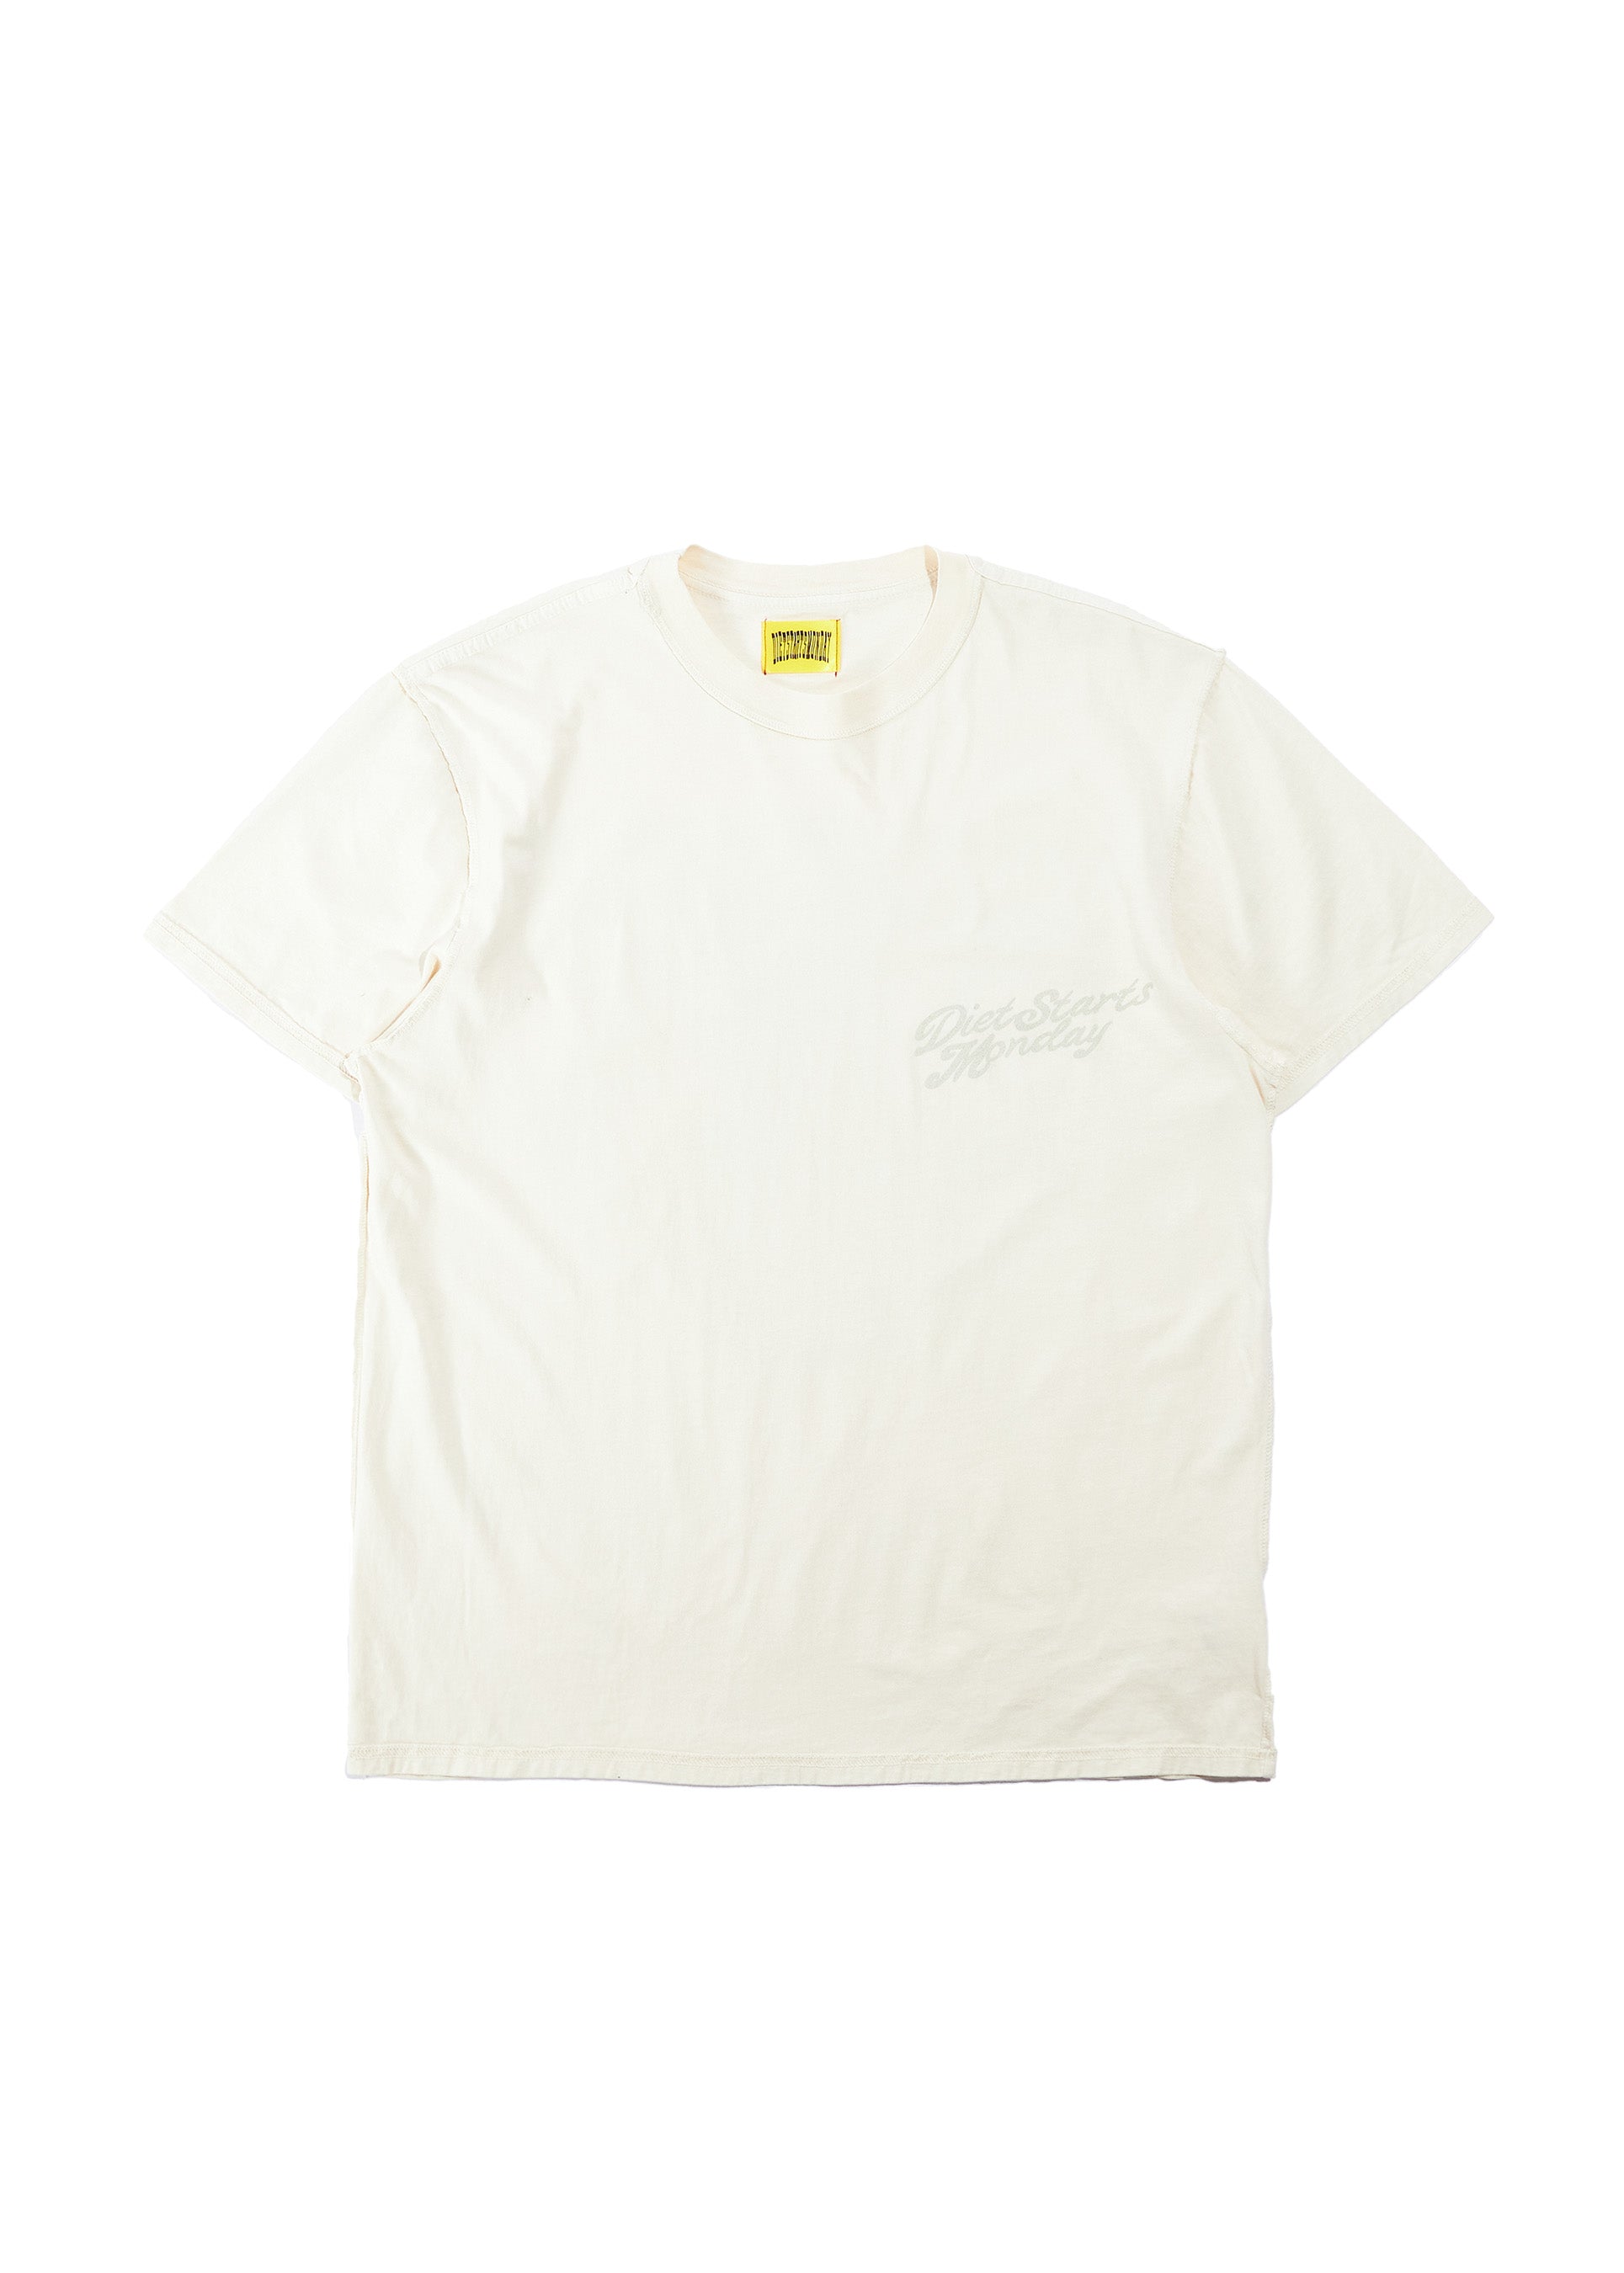 Only One Tee - Antique White